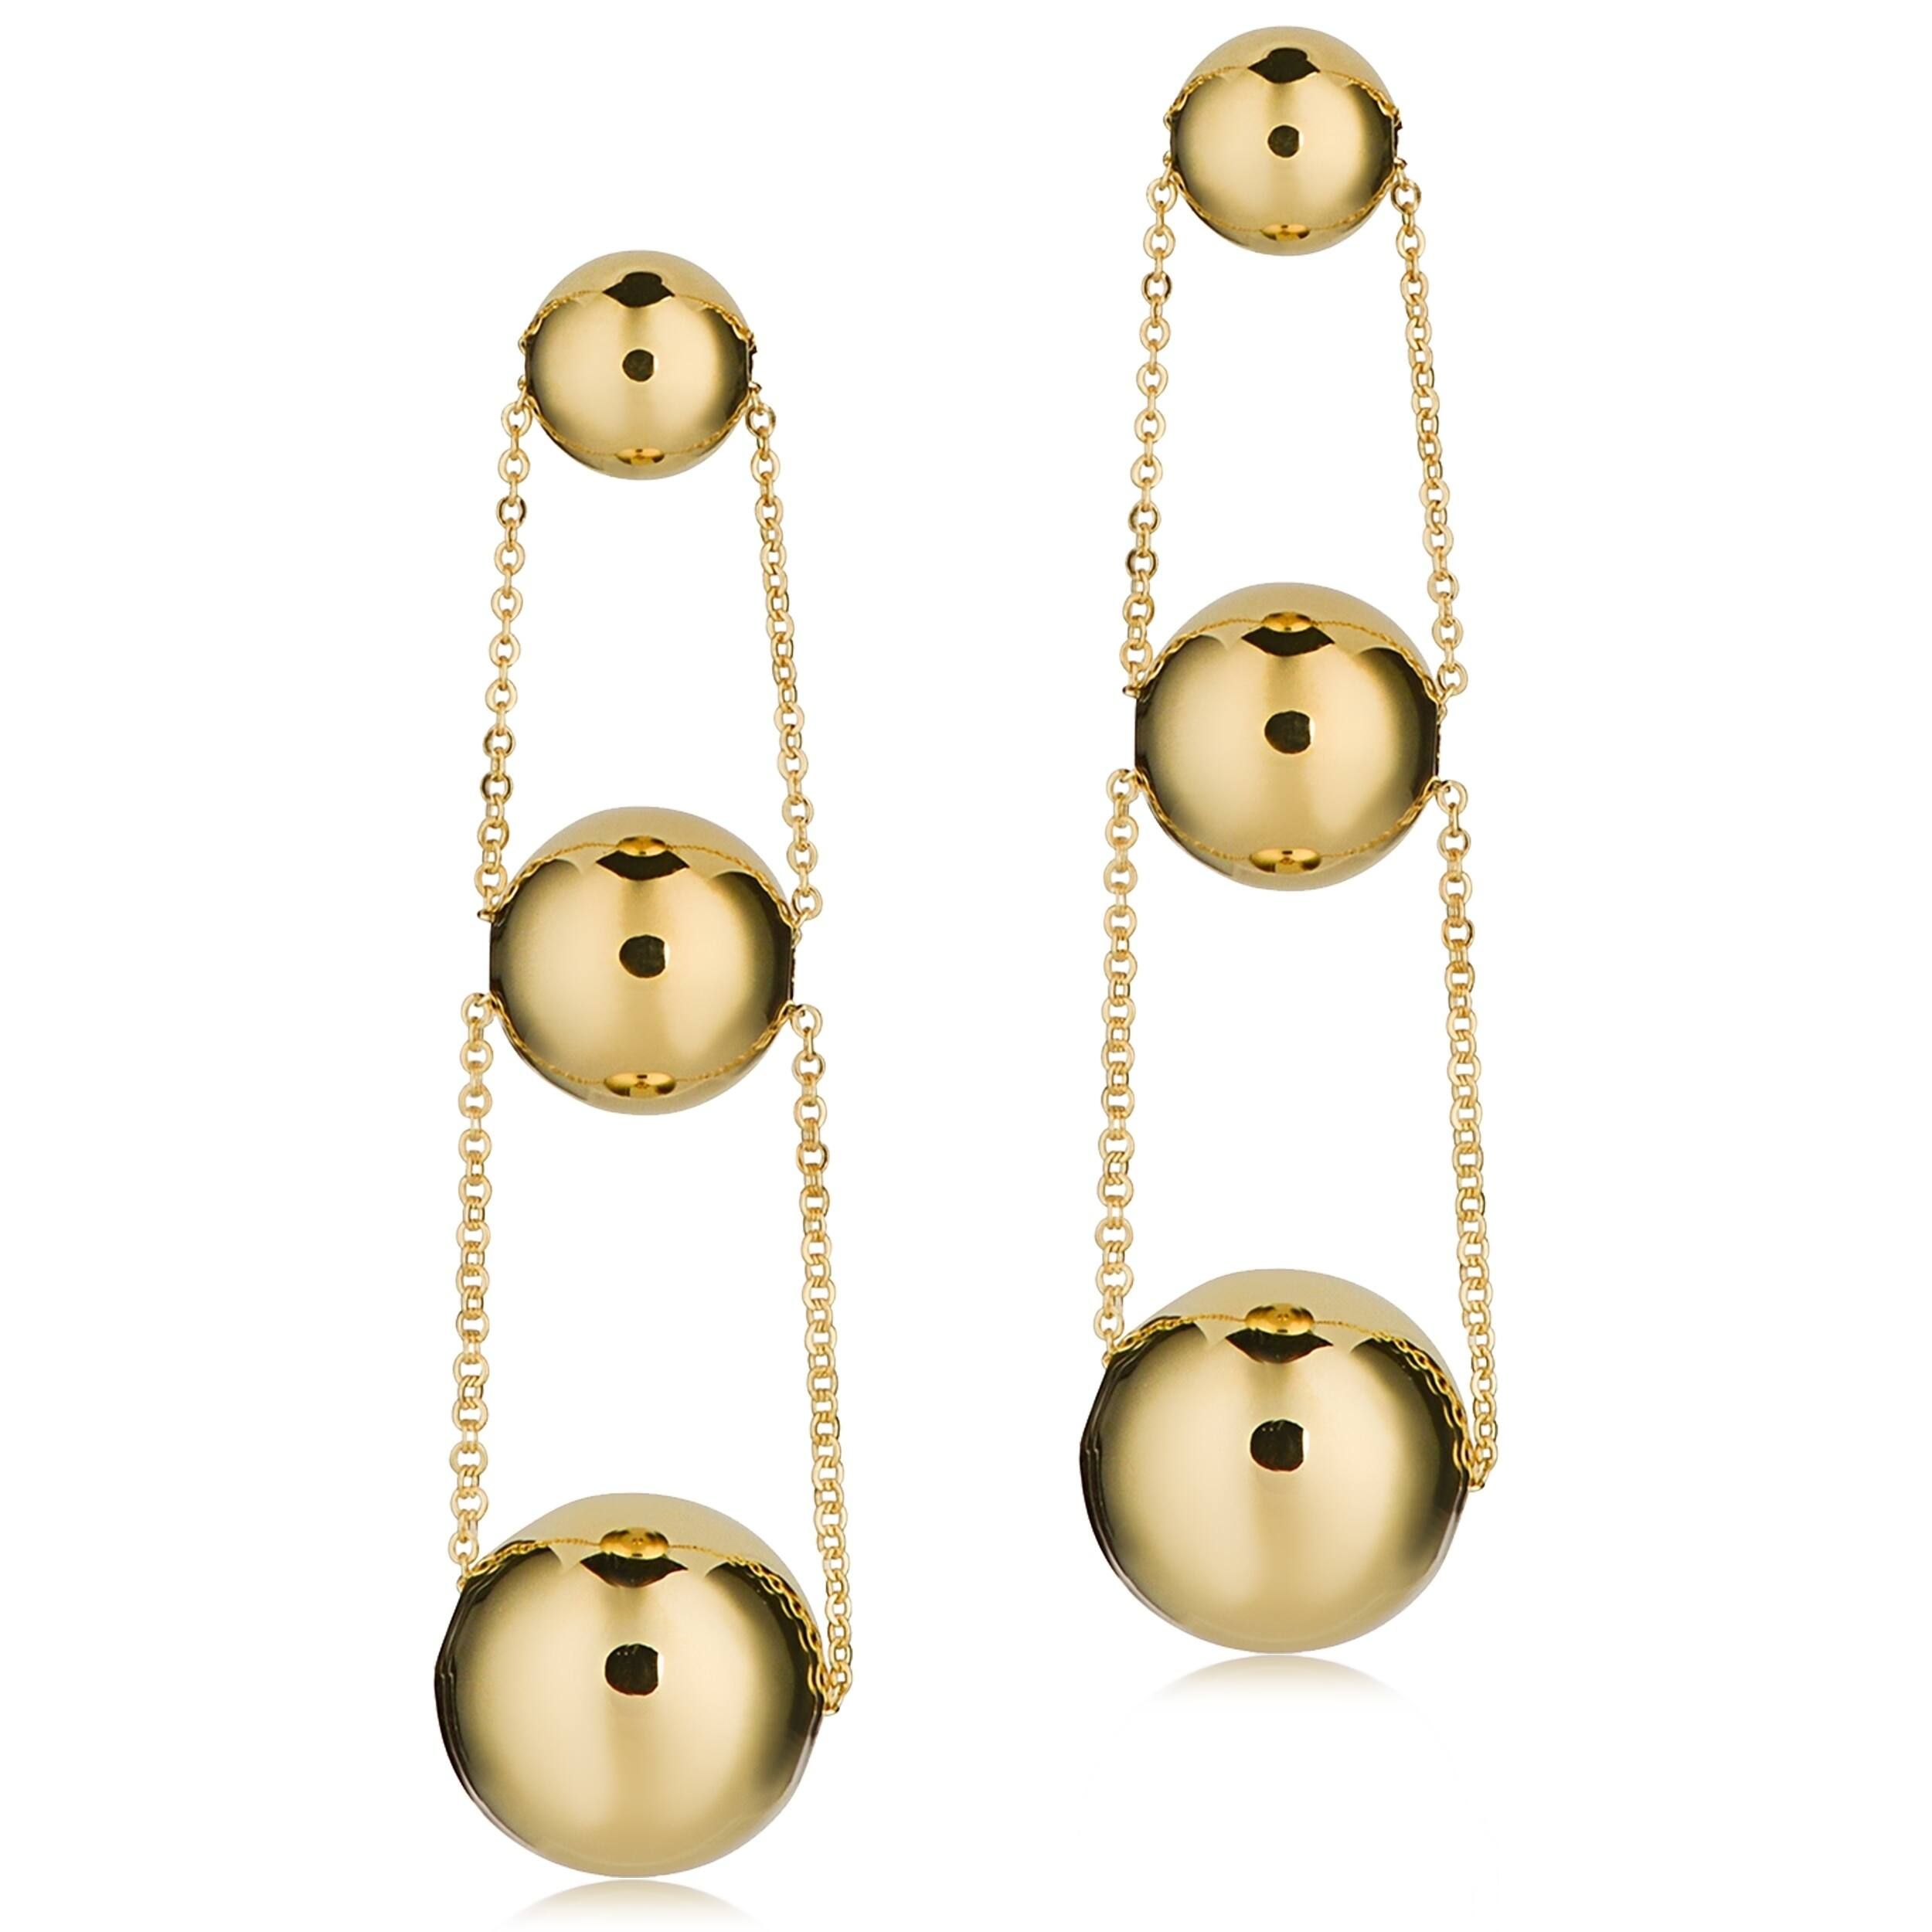 Fremada 14k Yellow Graduated Ball Drop Earrings, 1.7 inches | Bed Bath & Beyond